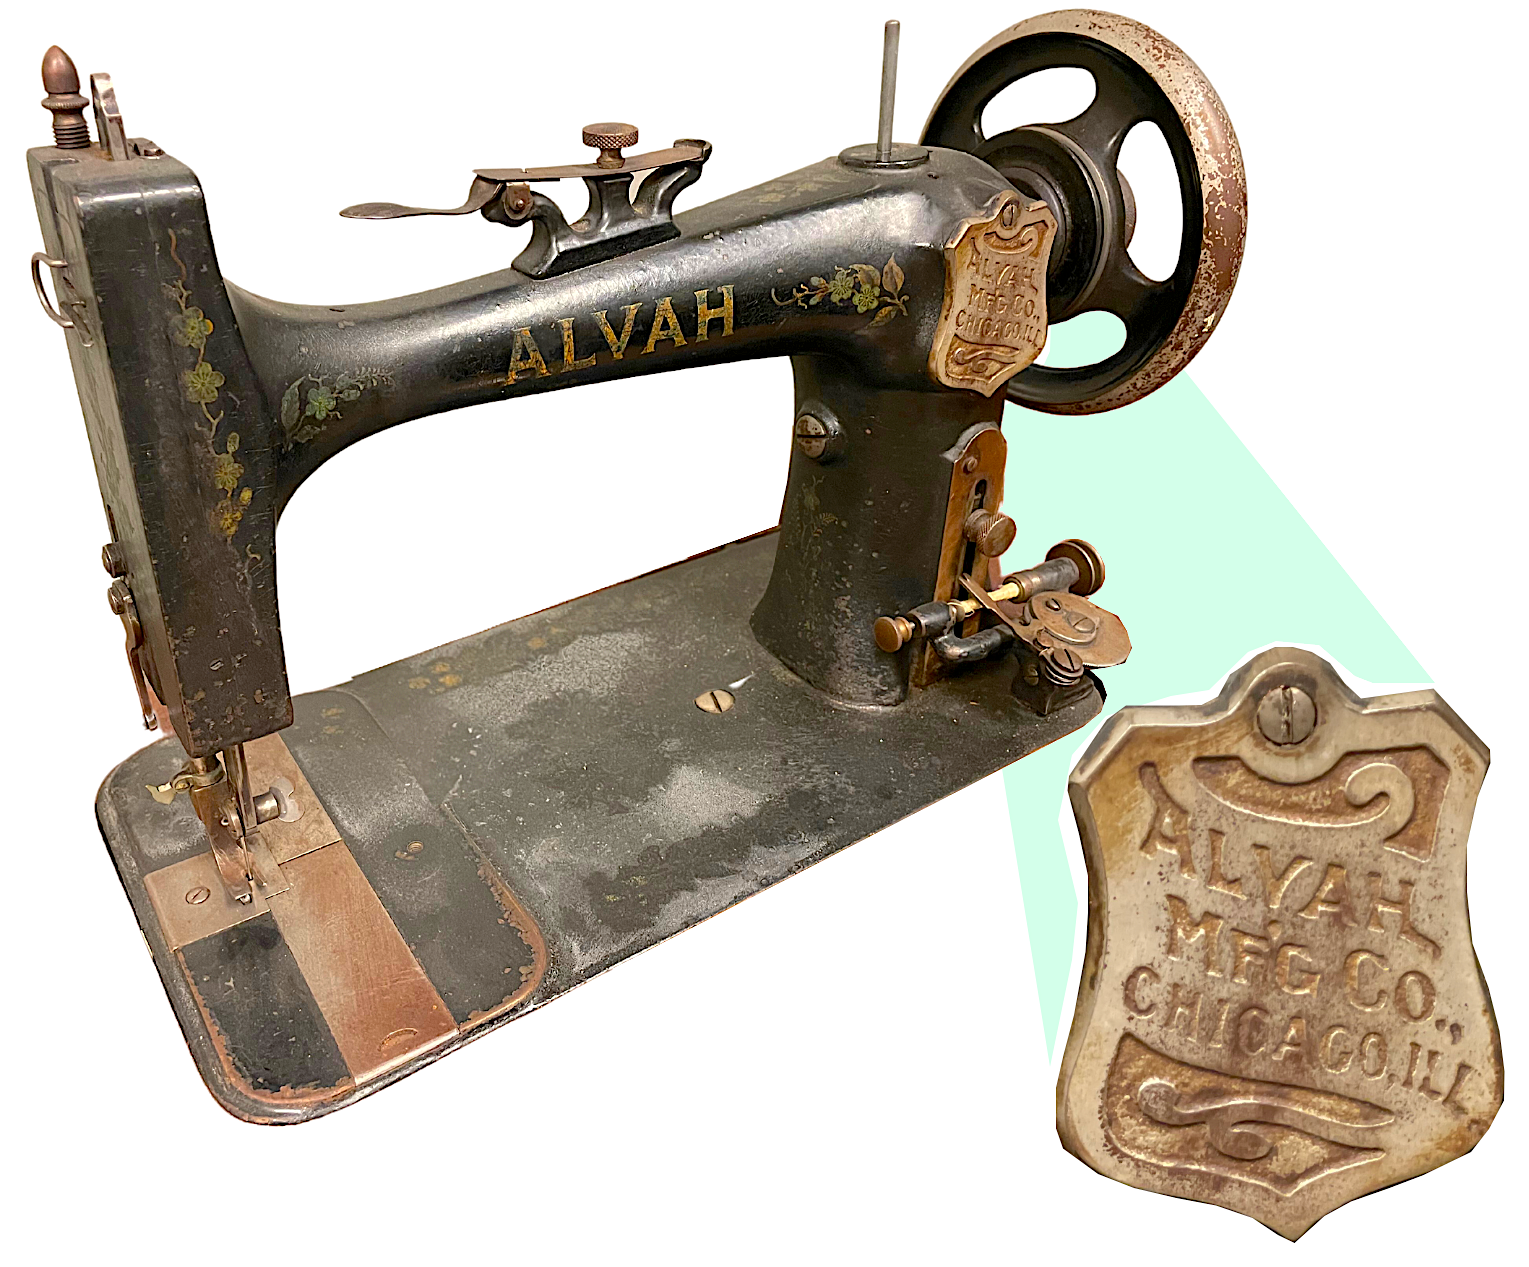 A History of Singer Sewing Machines - Direct Sewing Machines